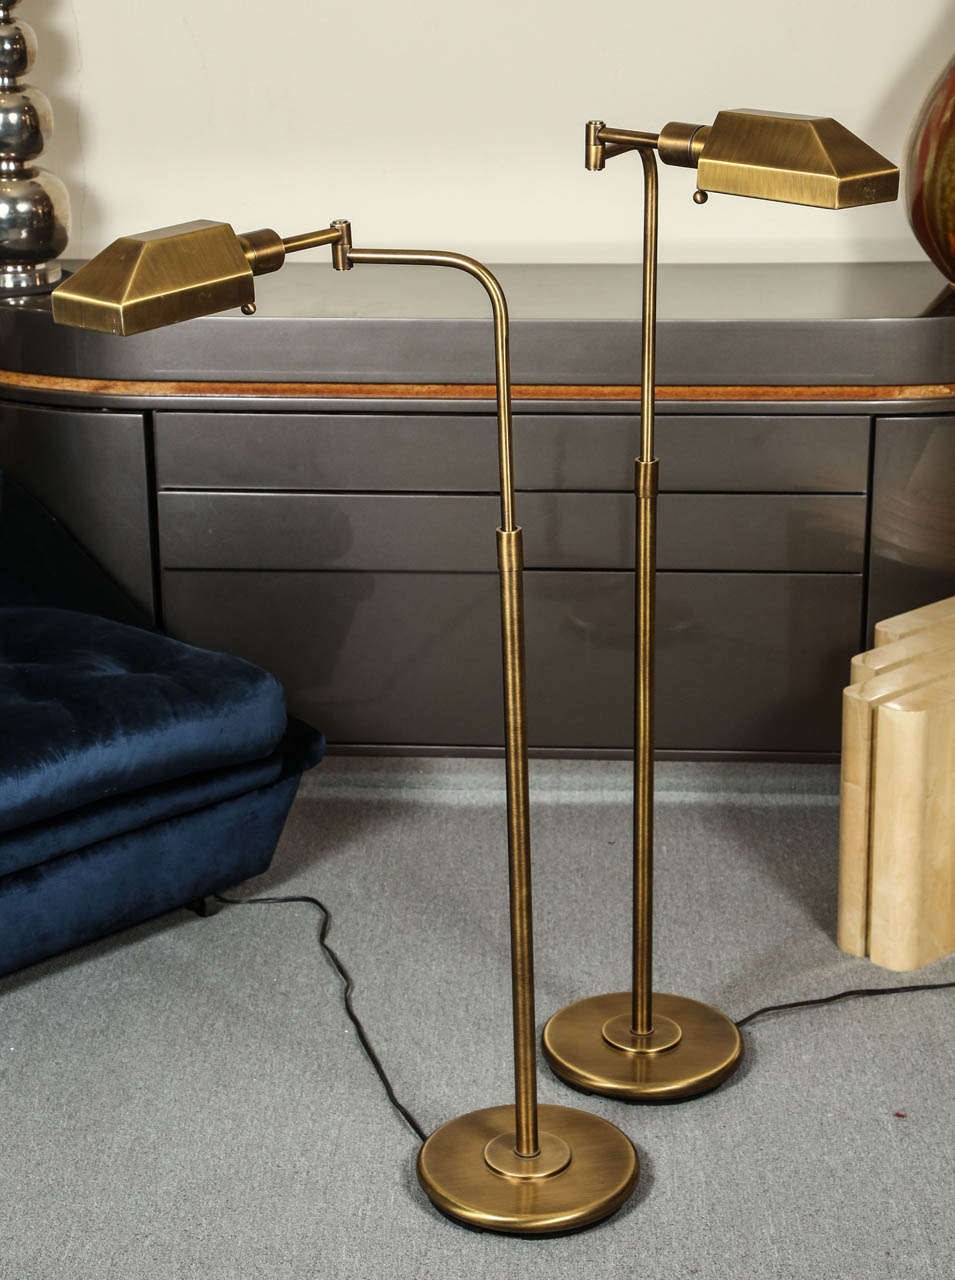 Very nice pair of pharmacy lamps in satin antiqued brass.